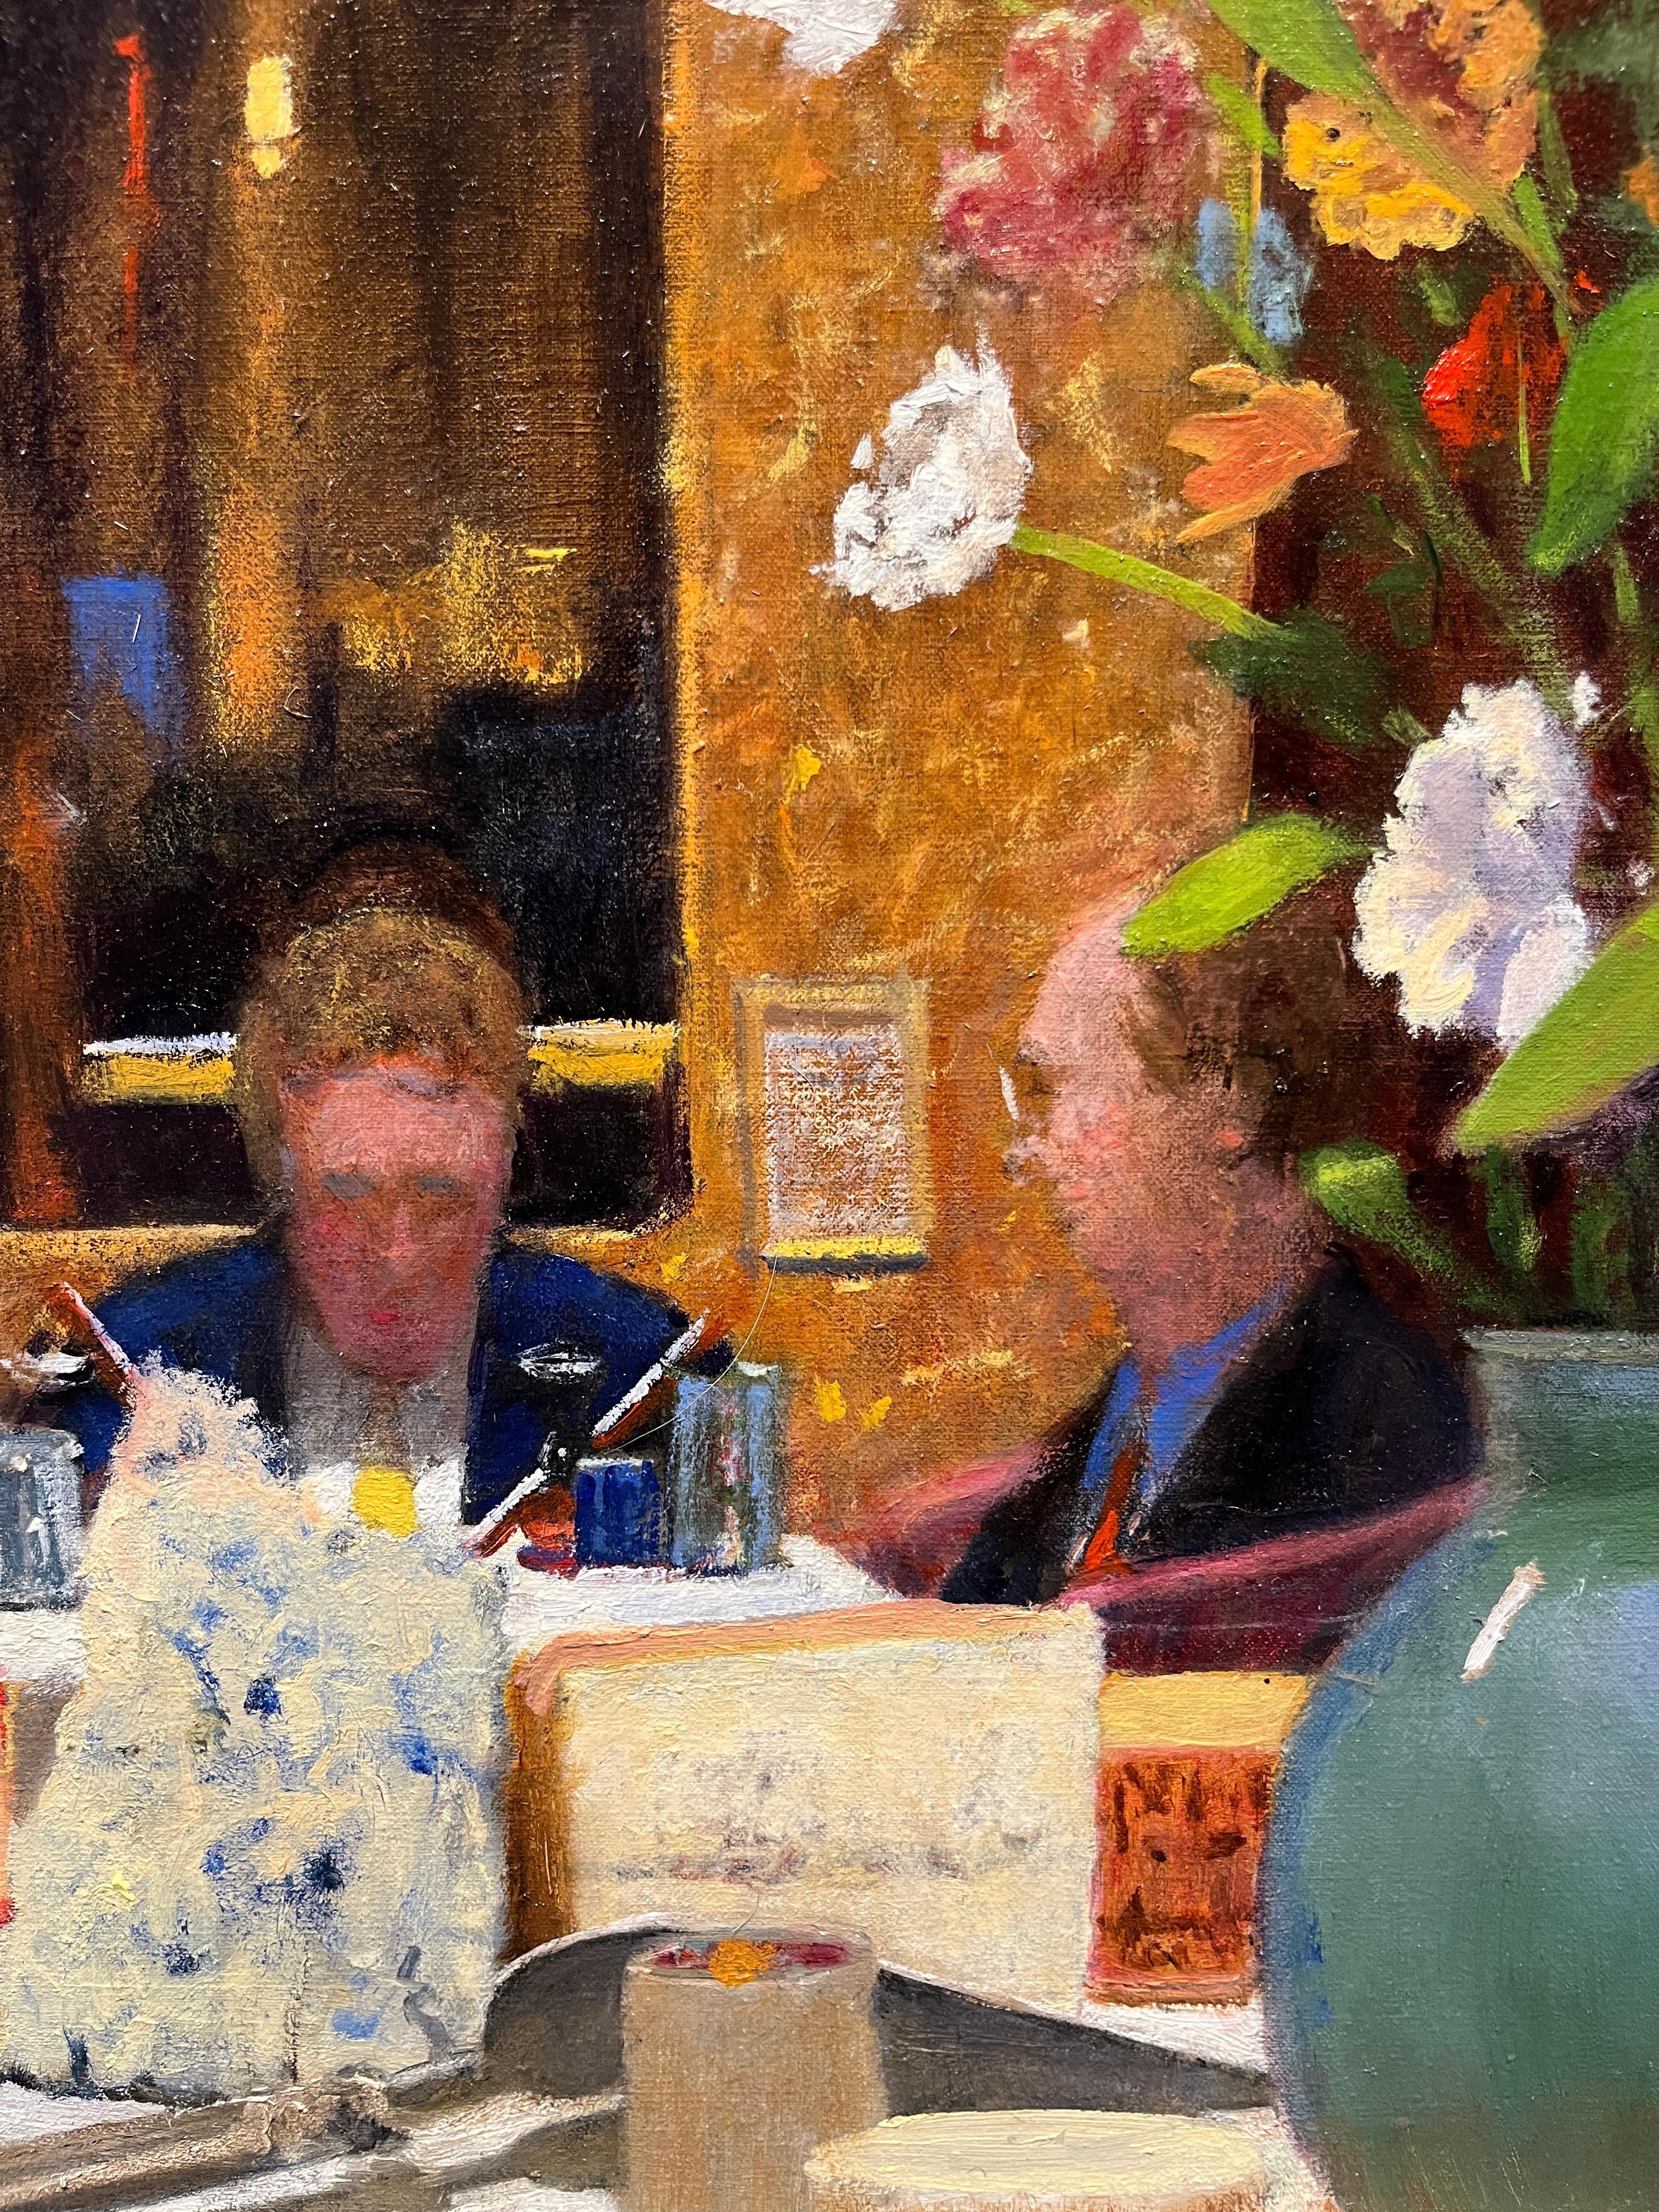 Cafe Society - American Realist Painting by Donald Jurney